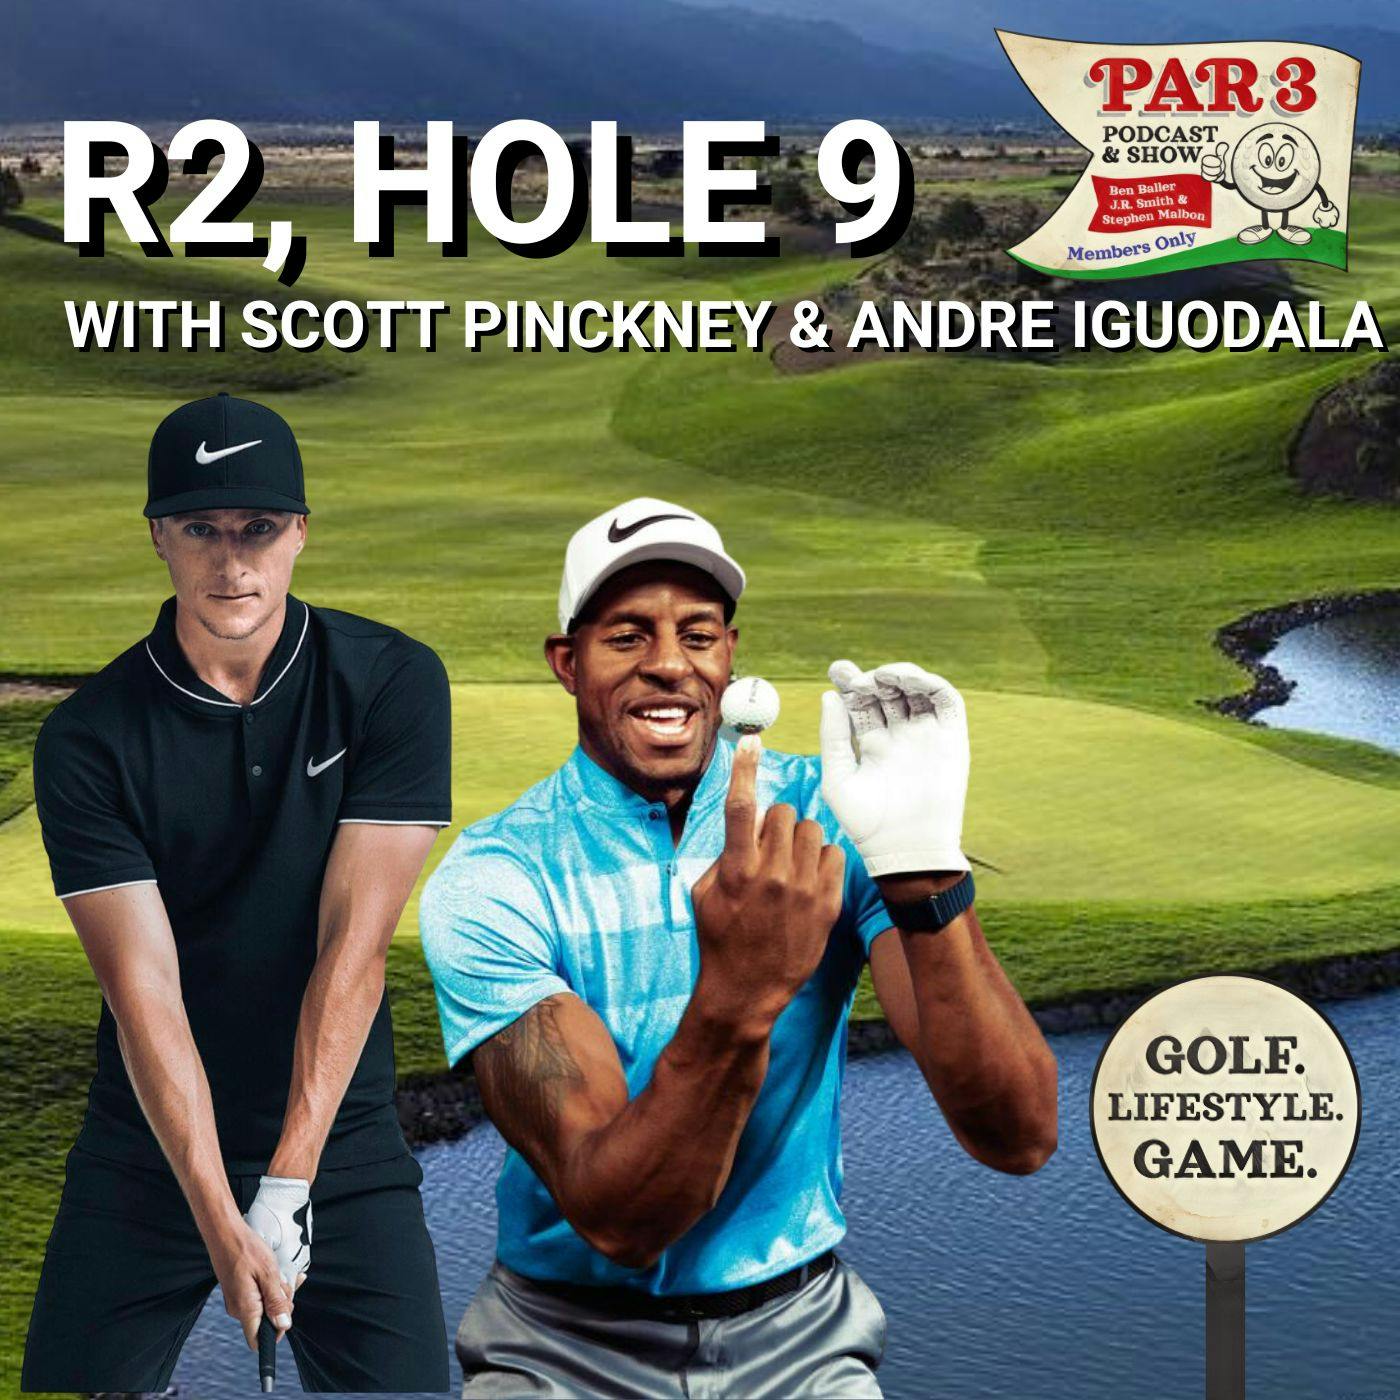 R2, HOLE 9: Scott Pinckney (PGA Tour Pro) & Andre Iguodala (4x NBA Champion/Avid Golfer) on Preparations as a Pro in Golf & Basketball, NBA Shooters & The Legend of Steph Curry on The Course & Court